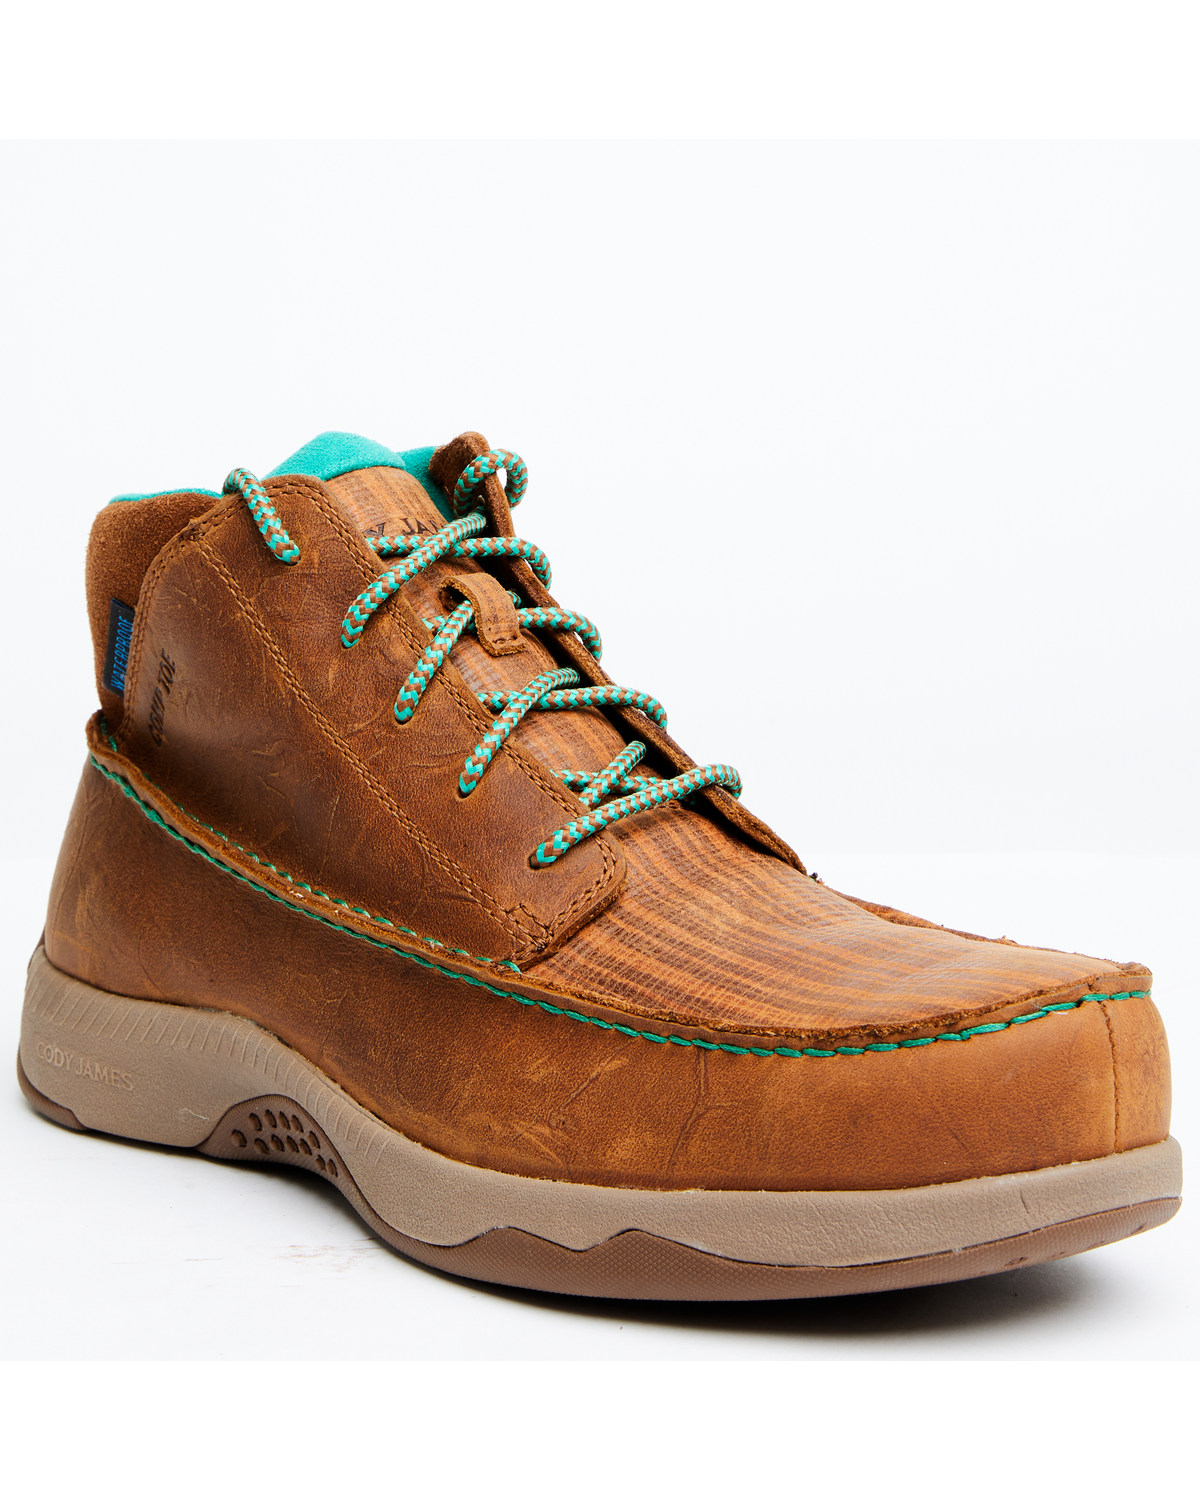 Cody James Men's Sport Blutcher Tyche Casual Lace-Up Work Boot - Composite Toe